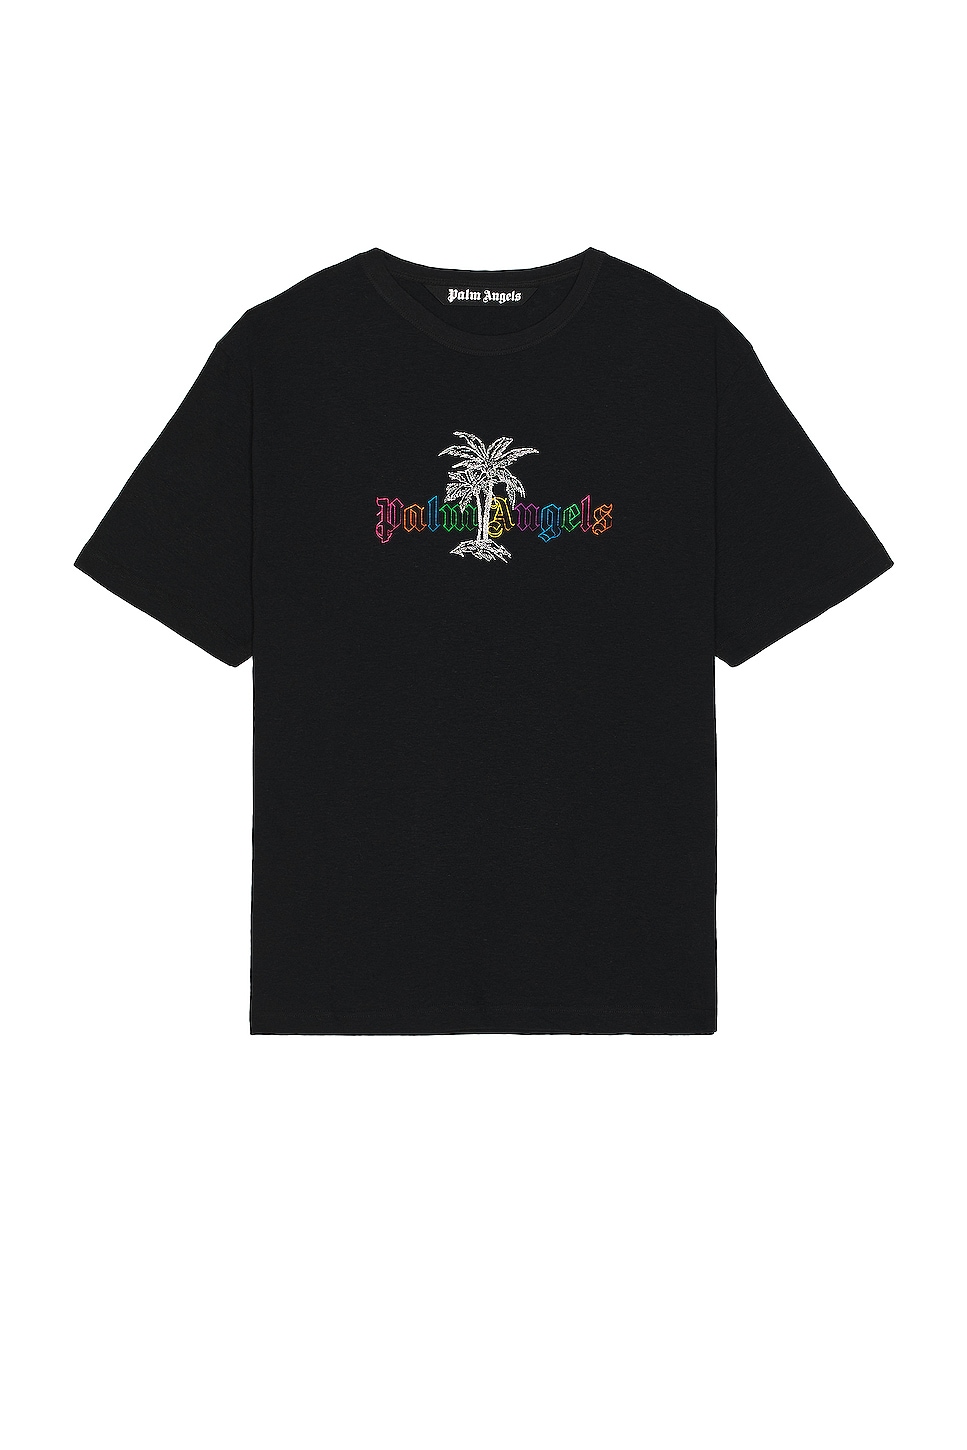 Image 1 of Palm Angels Collar Tee in Black & White